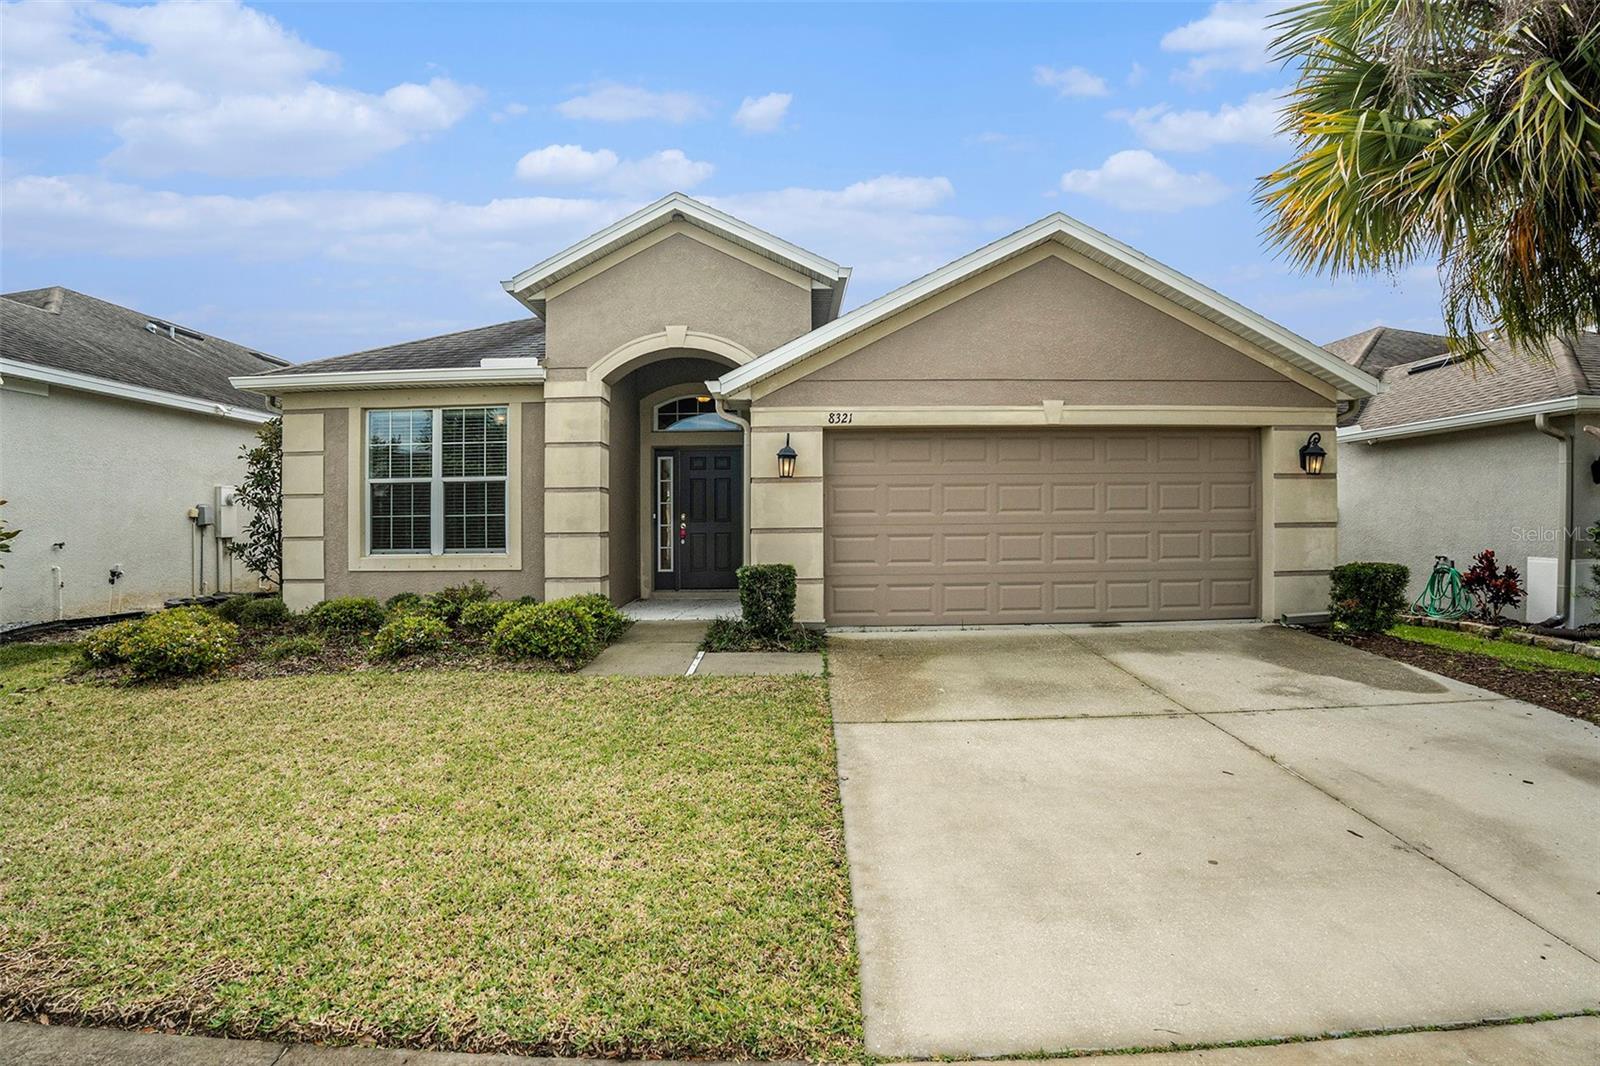 Photo one of 8321 Willow Beach Dr Riverview FL 33578 | MLS T3508656